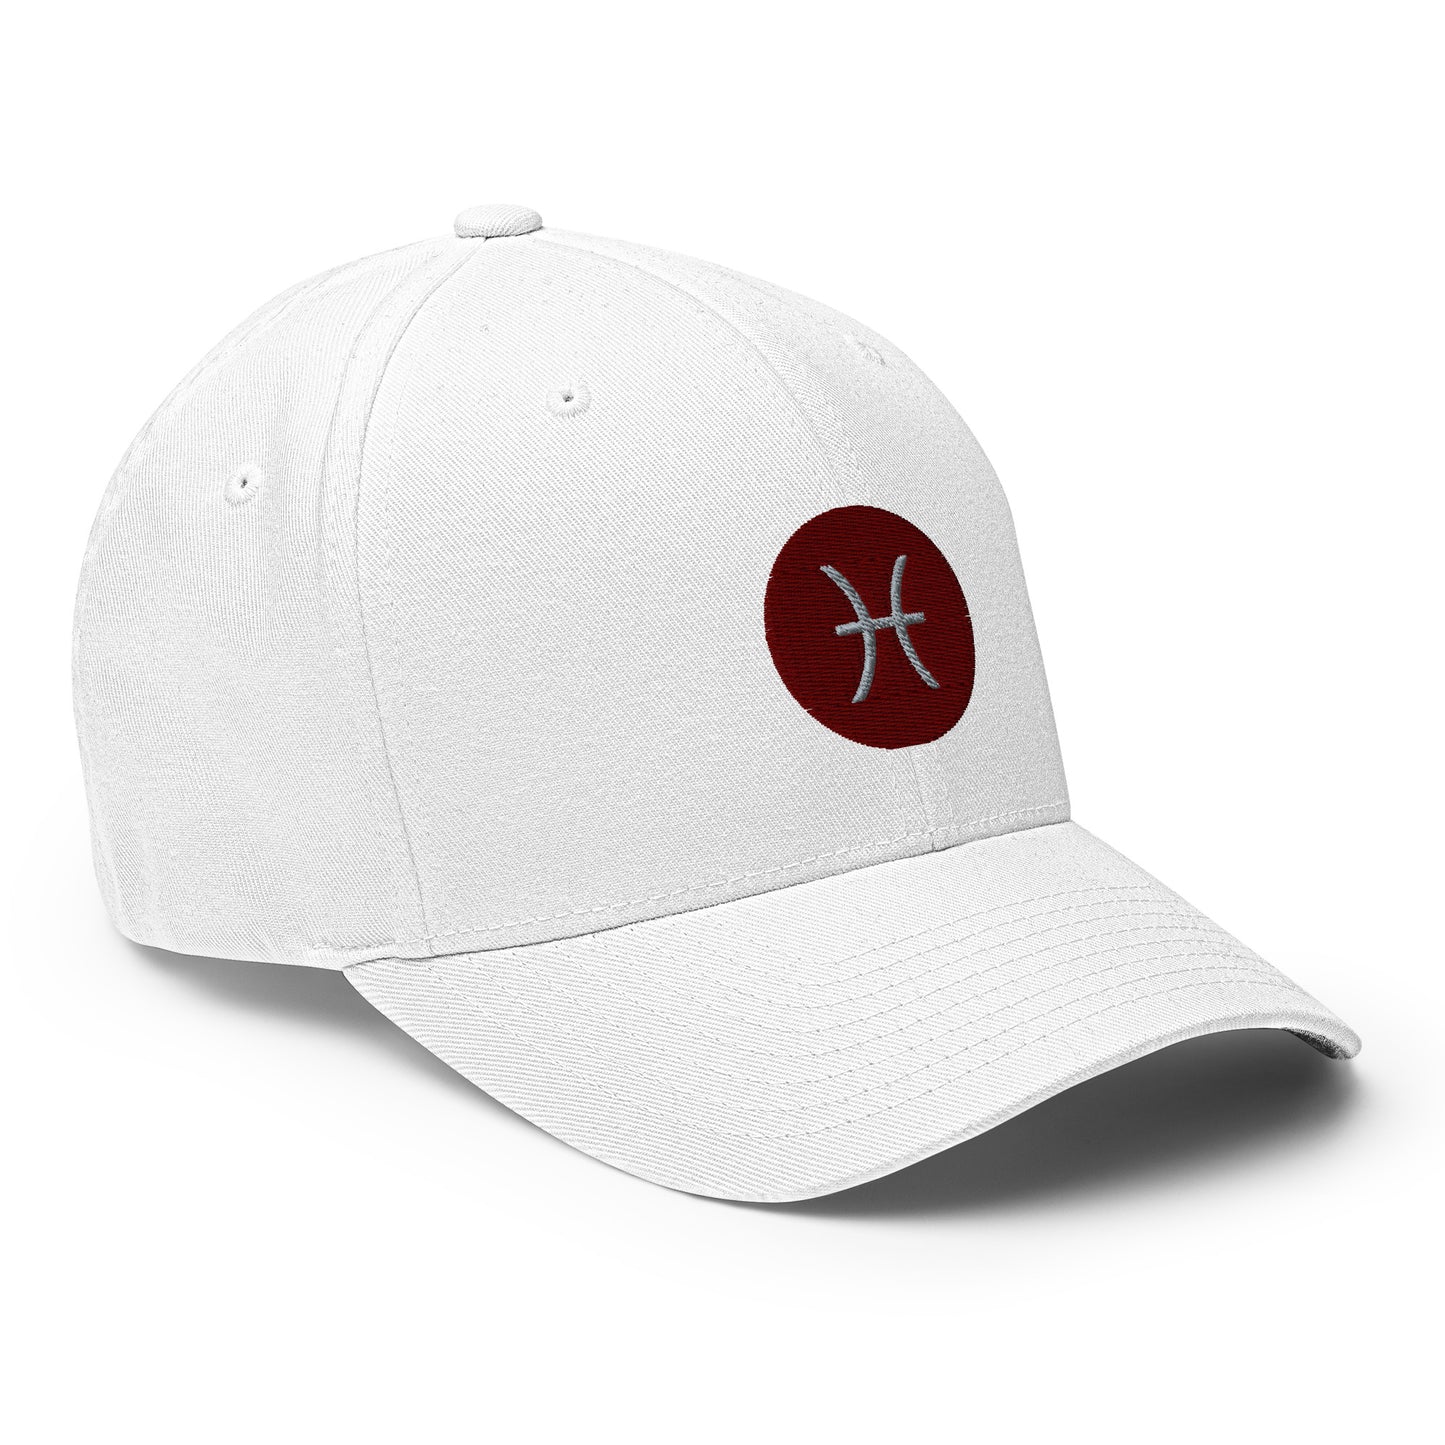 Baseball Cap with Pisces Symbol